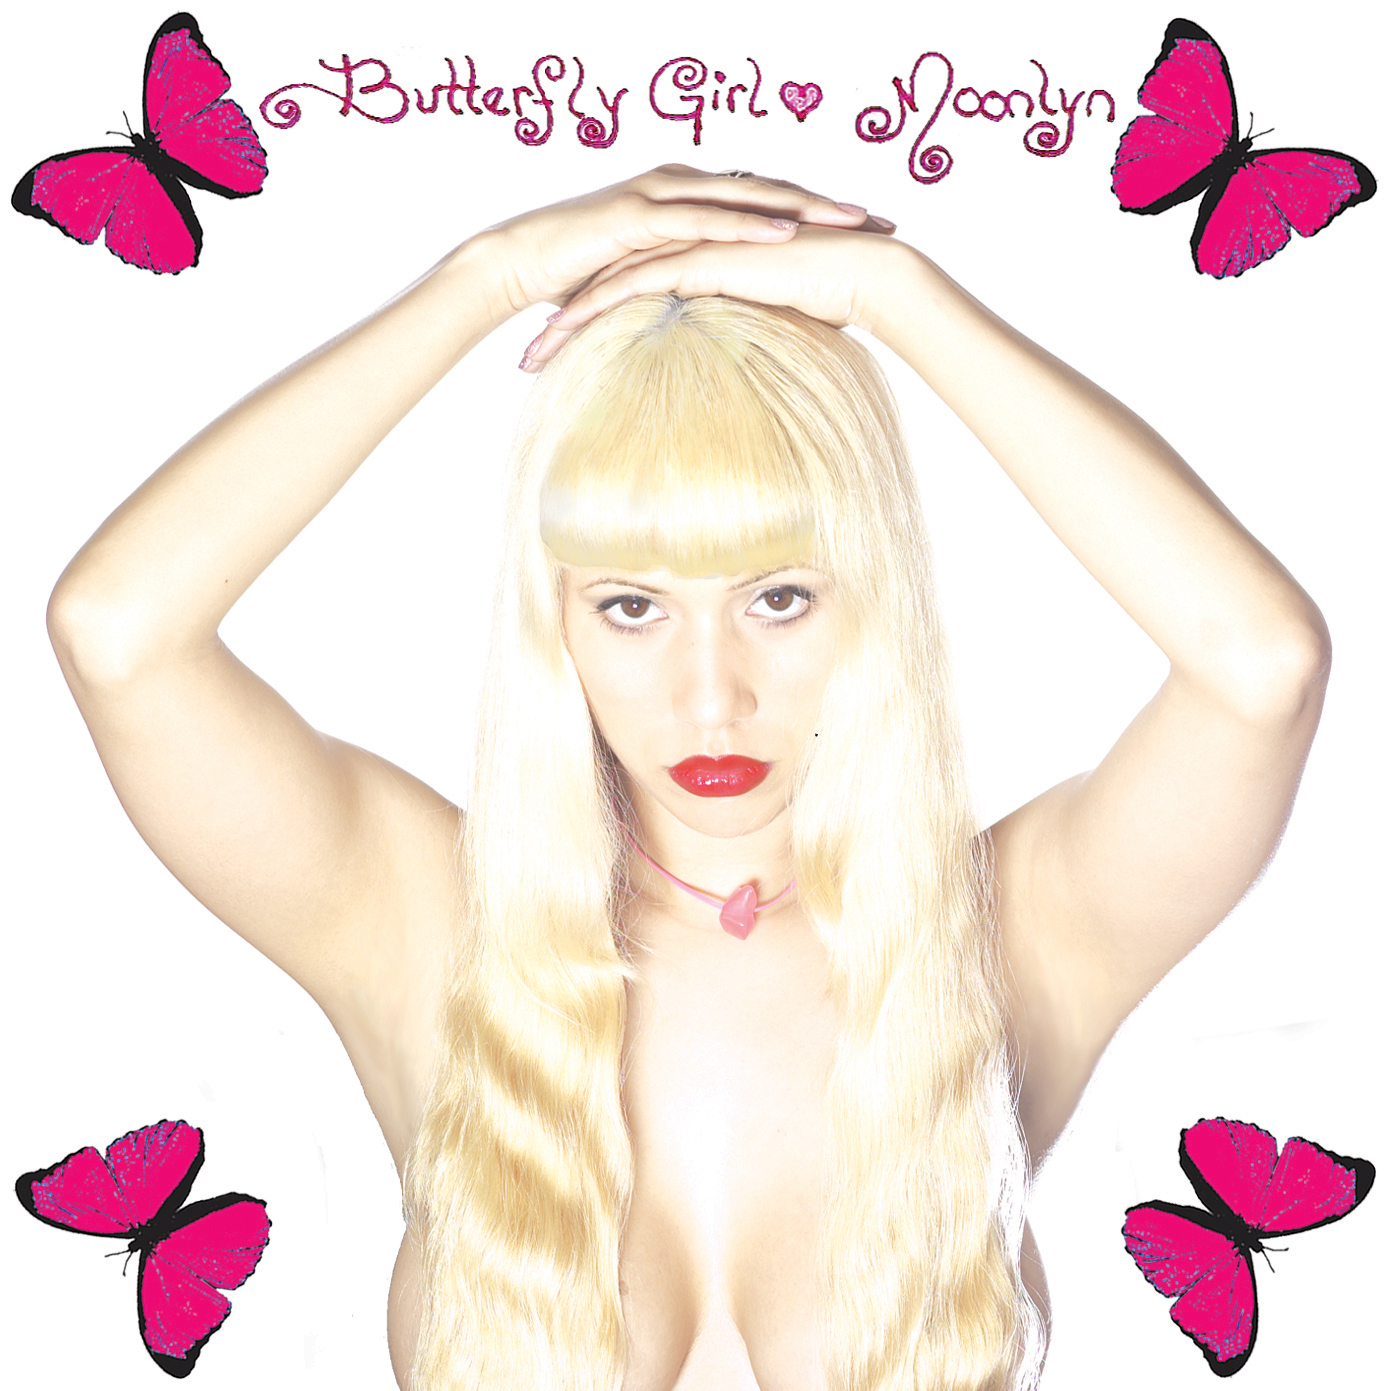 Butterfly_Girl_Album_Cover.jpg Happiness, La la la Song, Angels Sing Peace, Angel music, Angellic song, Peace Song, Blondes Prefer Gentlemen, Storm, Fairy Tale, Lolita, Lolita Your Beauty Can Kill, Butterfly Girl, Moonlyn, Butterfly Girl song, Butterfly Girl album, Butterfly Girl music, Moonlyn music, Blondes Prefer Gentlemen, Gentlemen Prefer Blondes, Marilyn Monroe Cover Song, I Wanna Be Loved By You, Jayne Mansfield Look-a-like, blonde bombshell, Silent Night